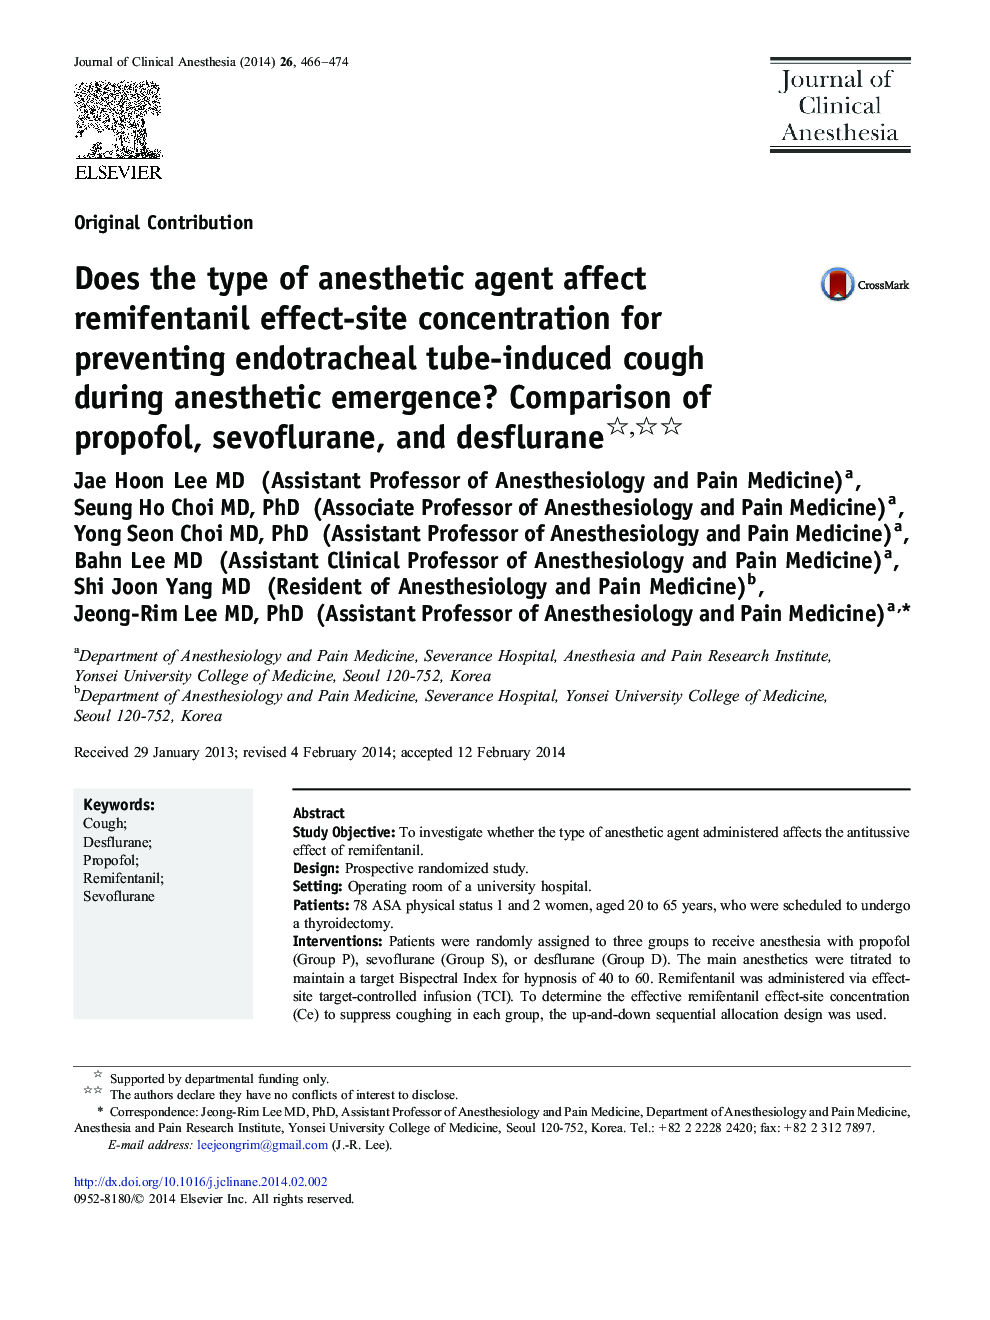 Does the type of anesthetic agent affect remifentanil effect-site concentration for preventing endotracheal tube-induced cough during anesthetic emergence? Comparison of propofol, sevoflurane, and desflurane 